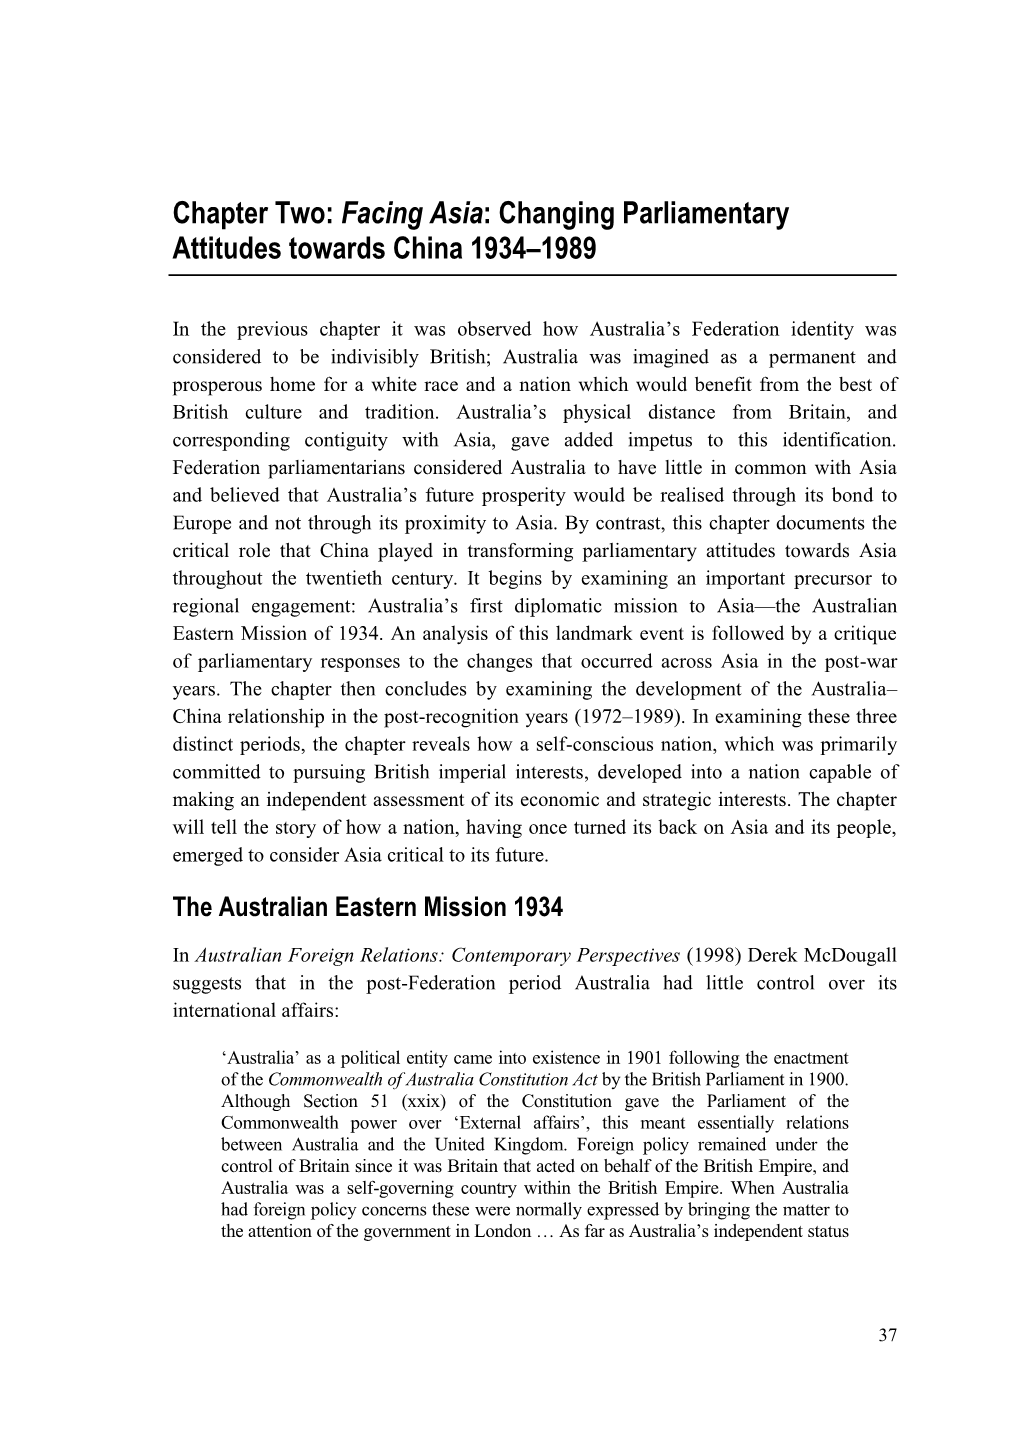 Chapter Two: Facing Asia: Changing Parliamentary Attitudes Towards China 1934–1989